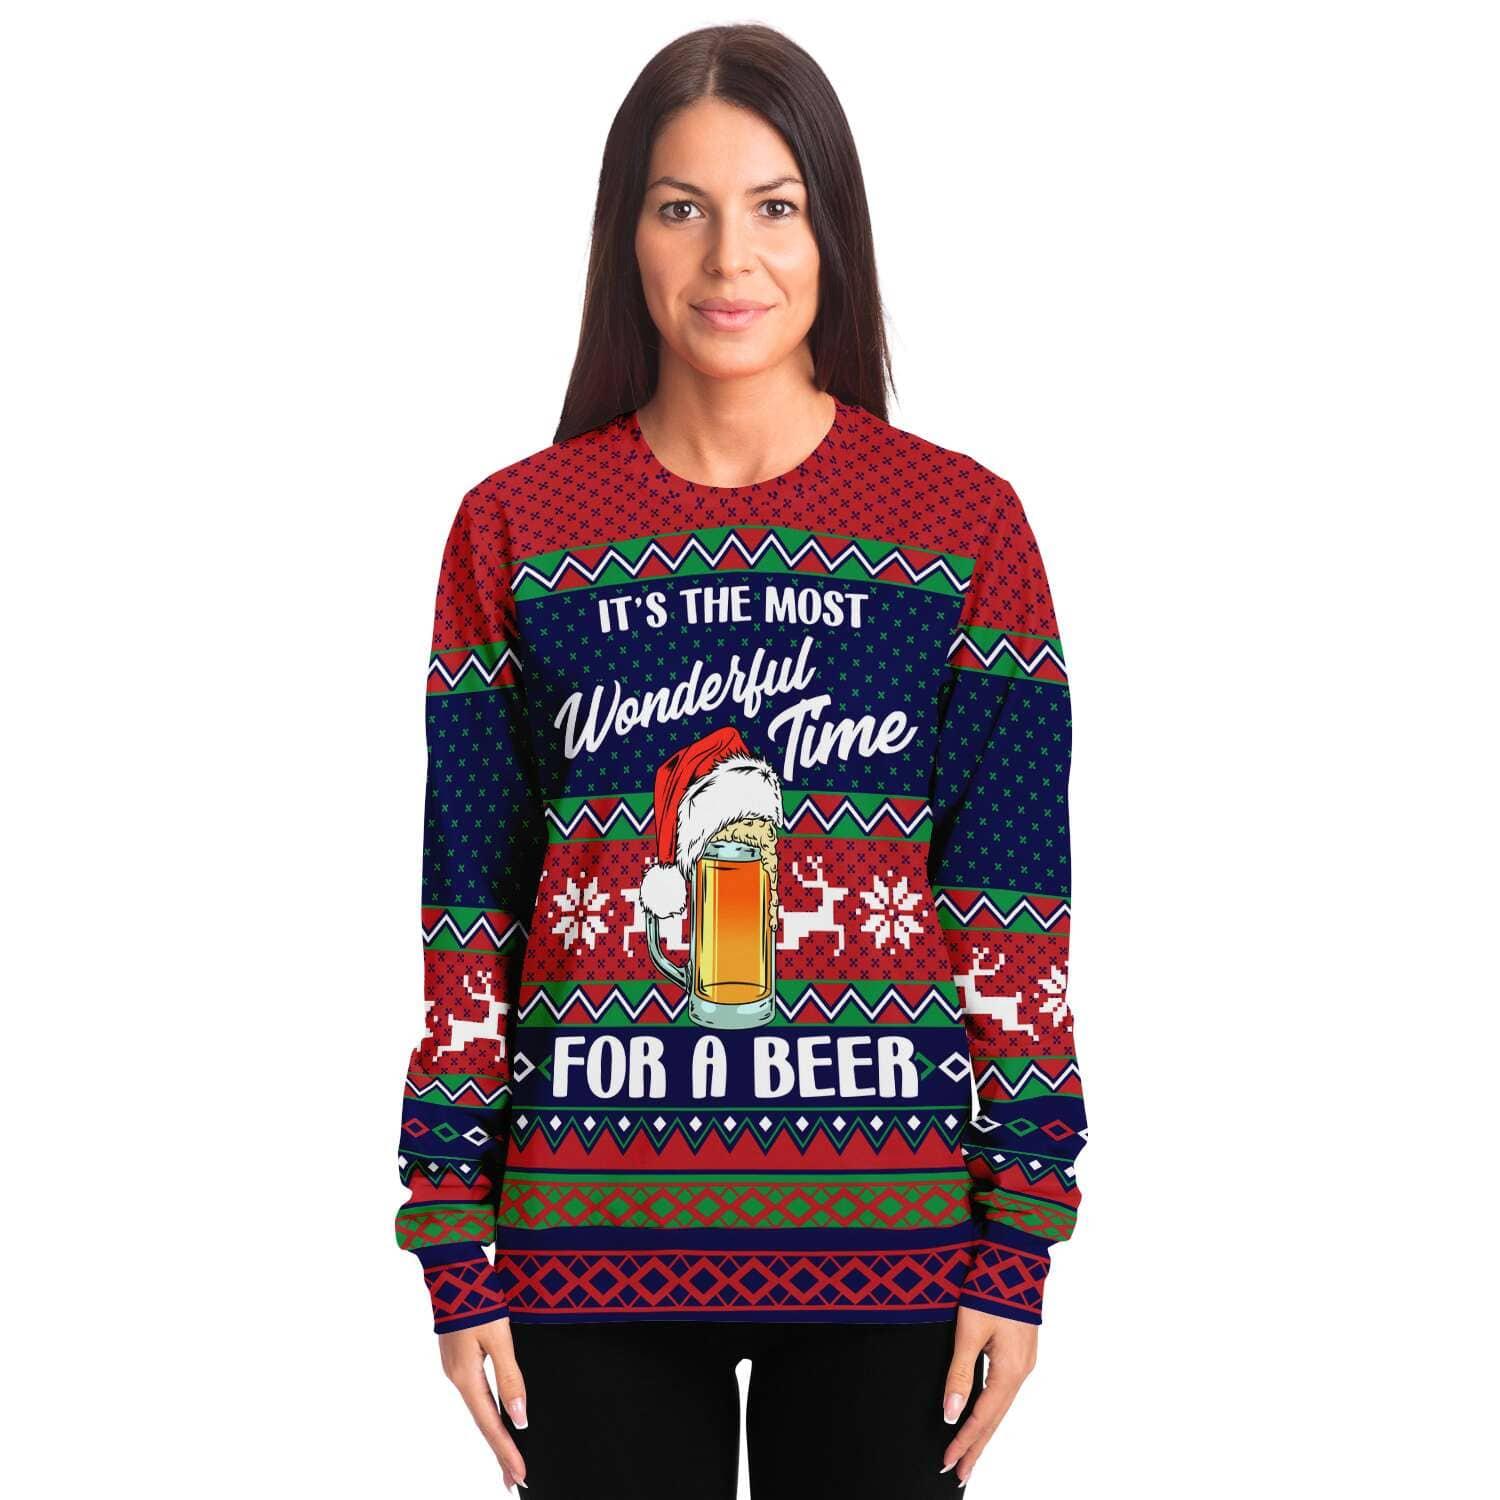 It's the most wonderful time for Beer Unisex Ugly Christmas Sweater - TopKoalaTee